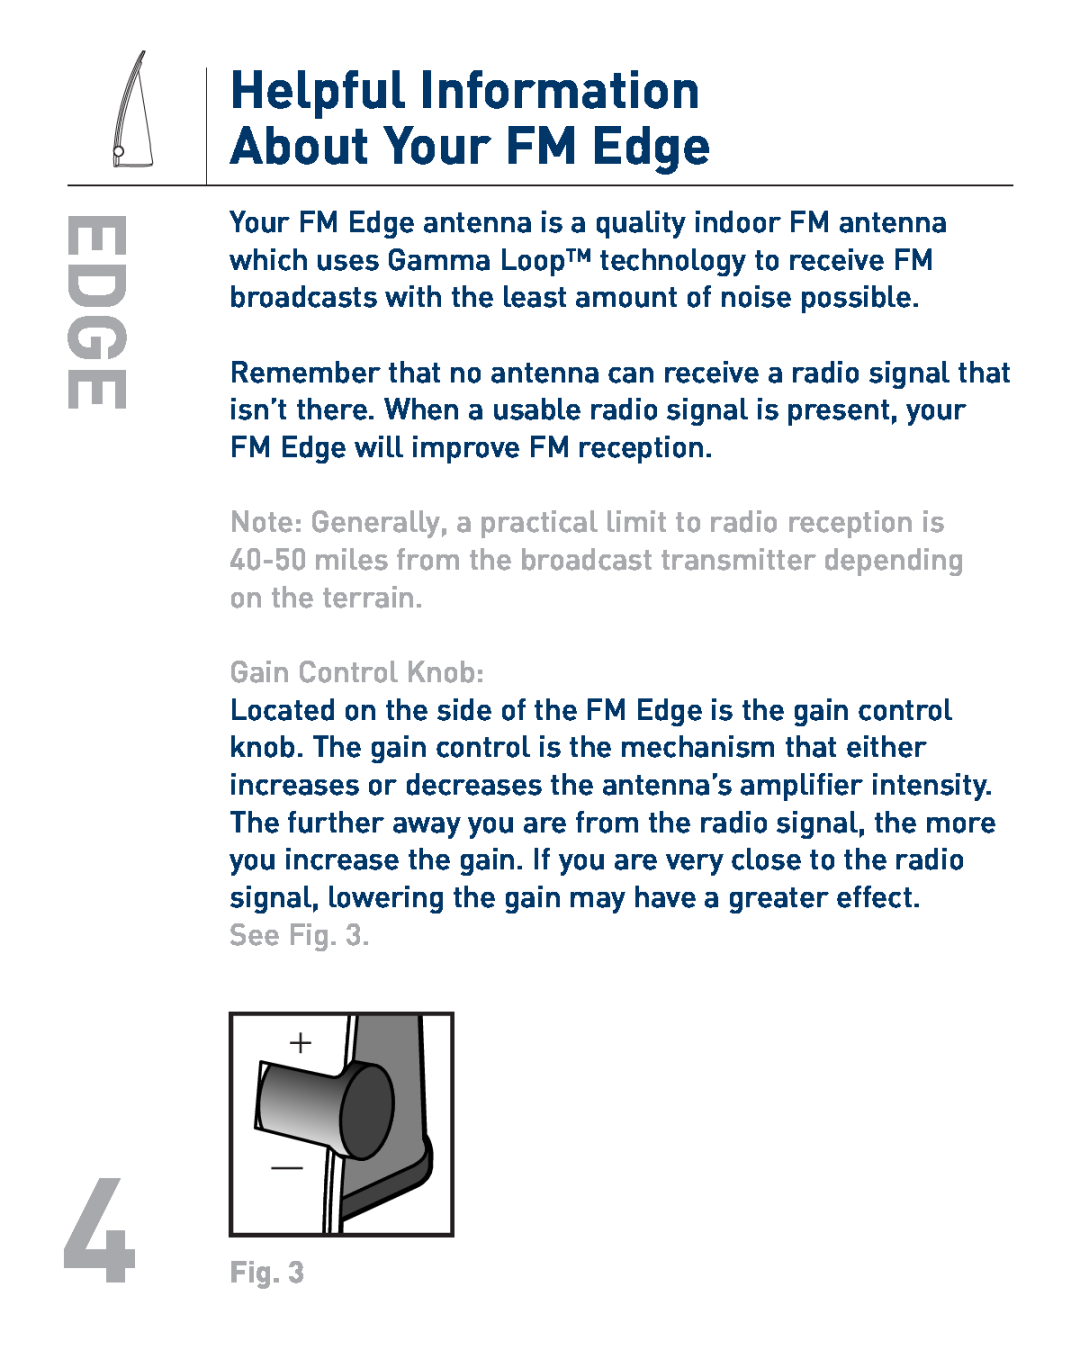 TERK Technologies manual Helpful Information About Your FM Edge, Gain Control Knob, See Fig 